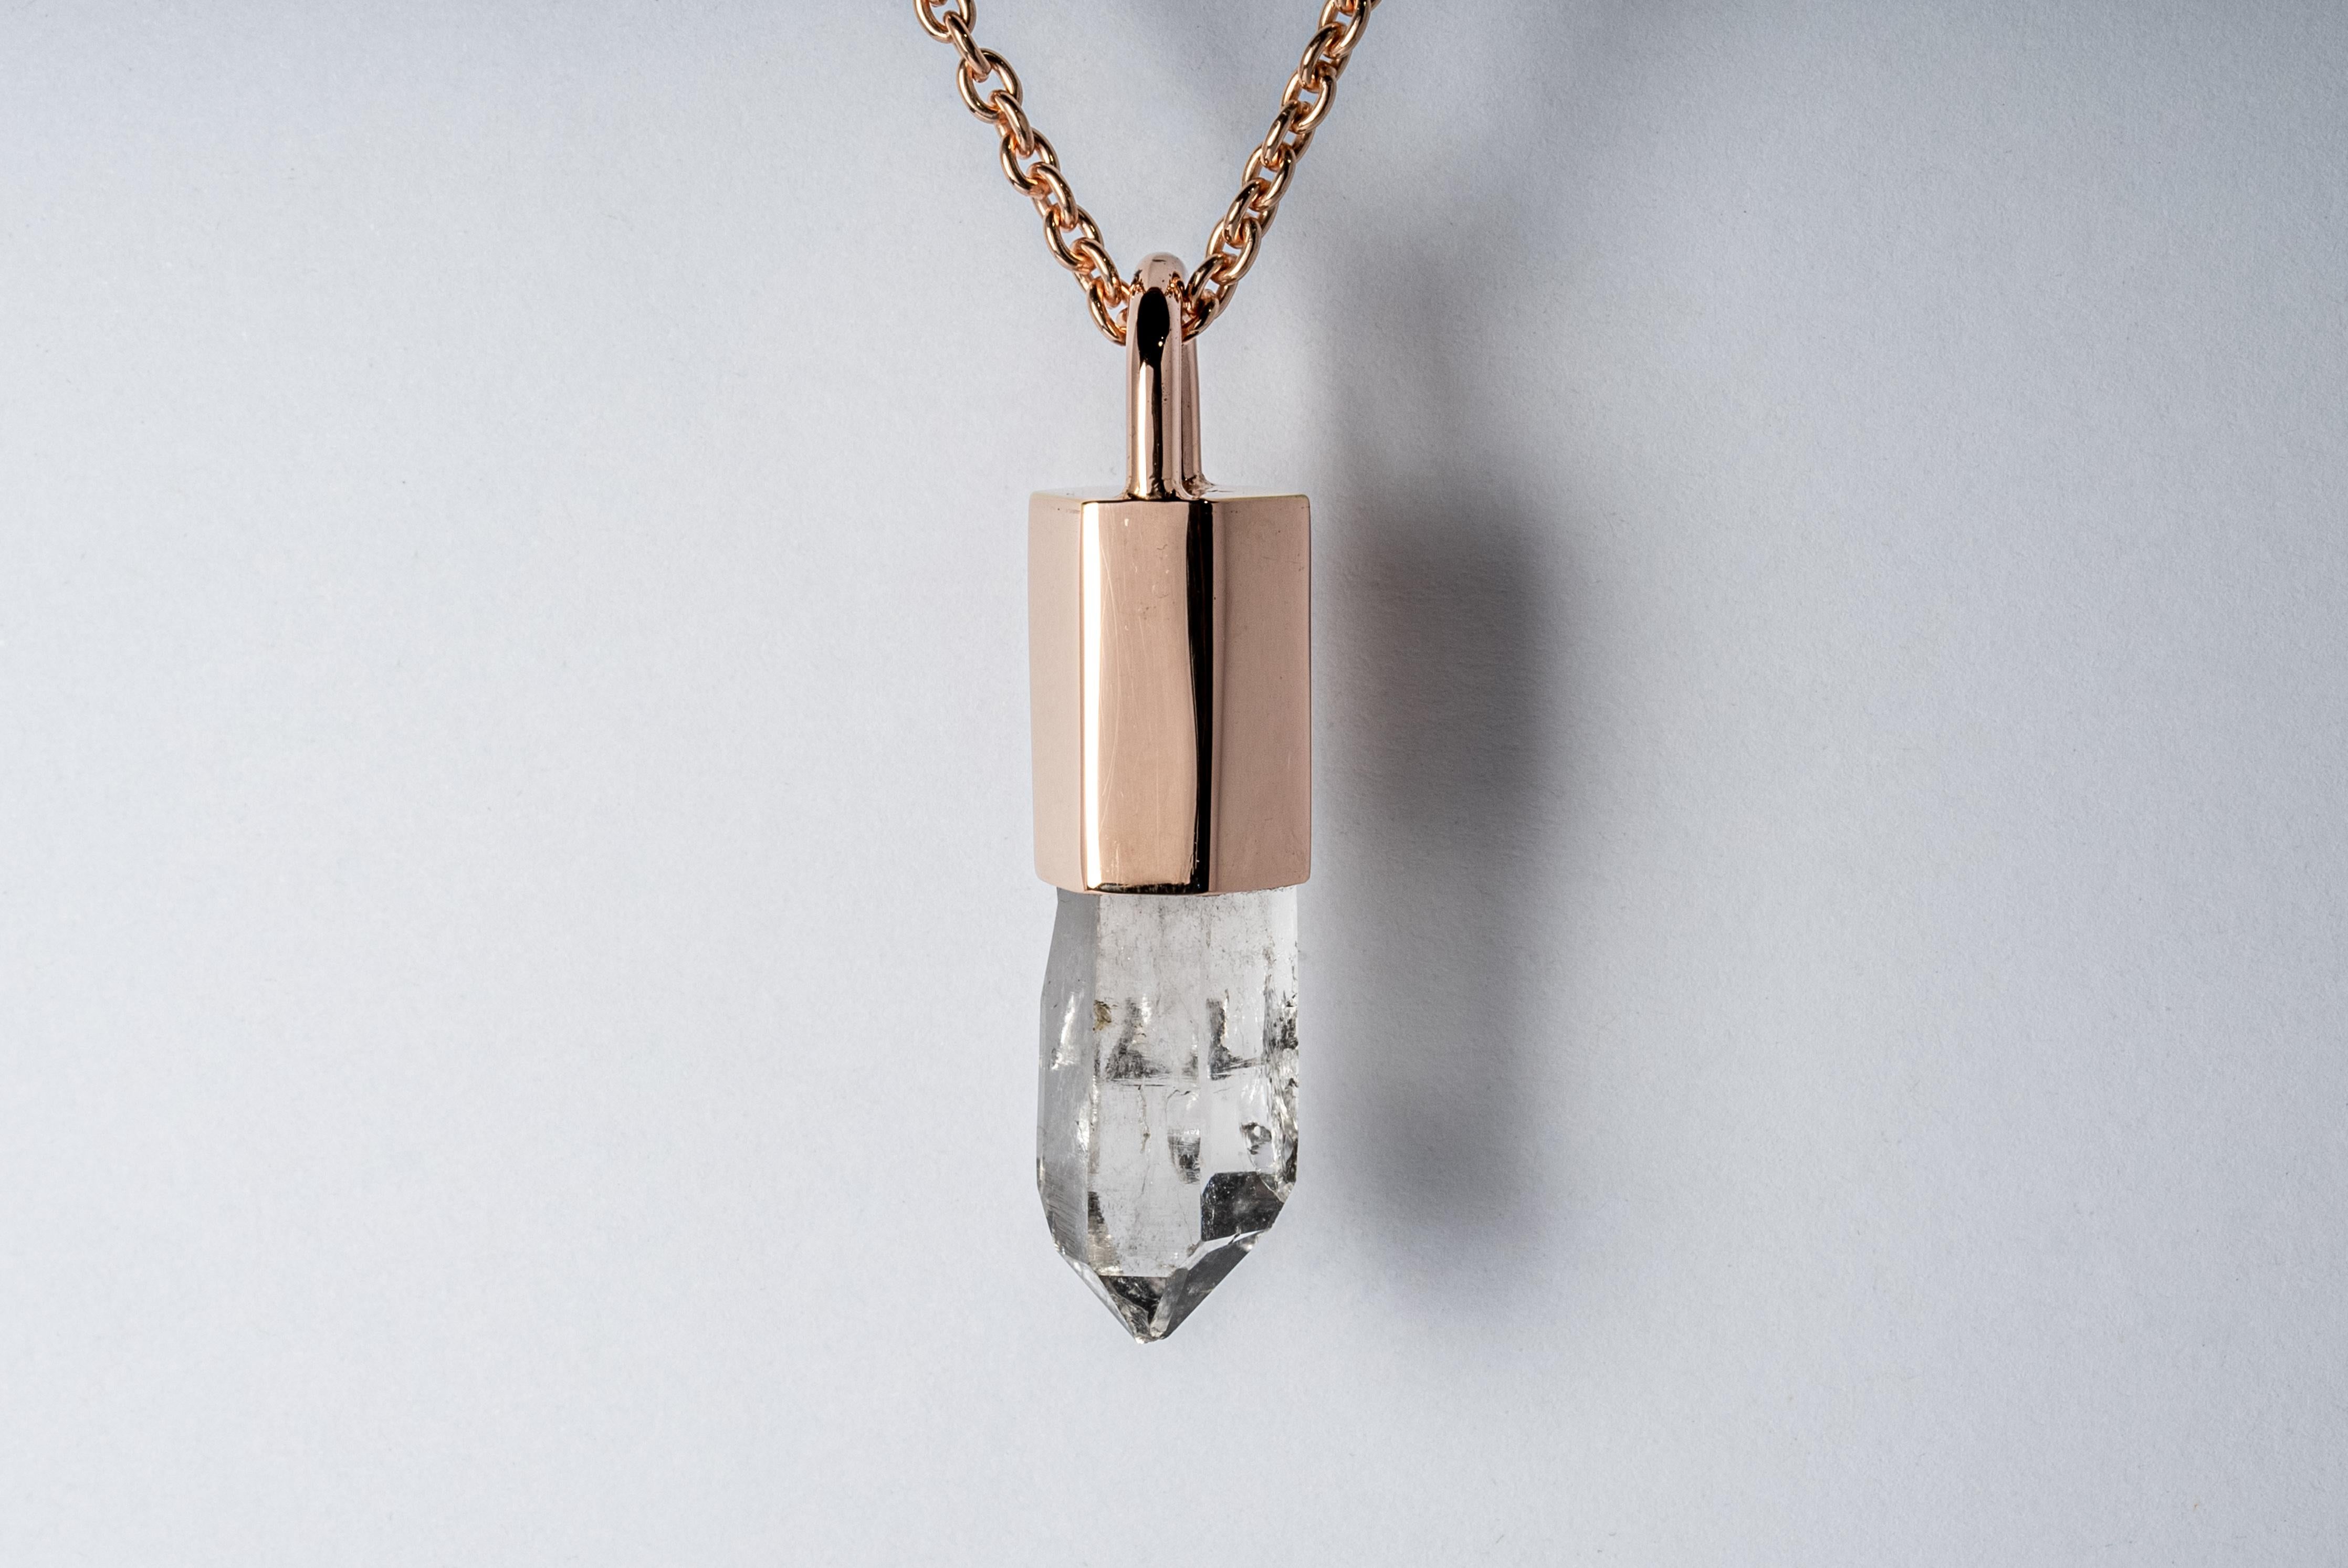 Pendant necklace in brass, sterling silver, and a rough of misc quartz. Brass and sterling silver substrates are electroplated with 18k rose gold and then dipped into acid to create the subtly destroyed surface.
The Talisman series is an exploration